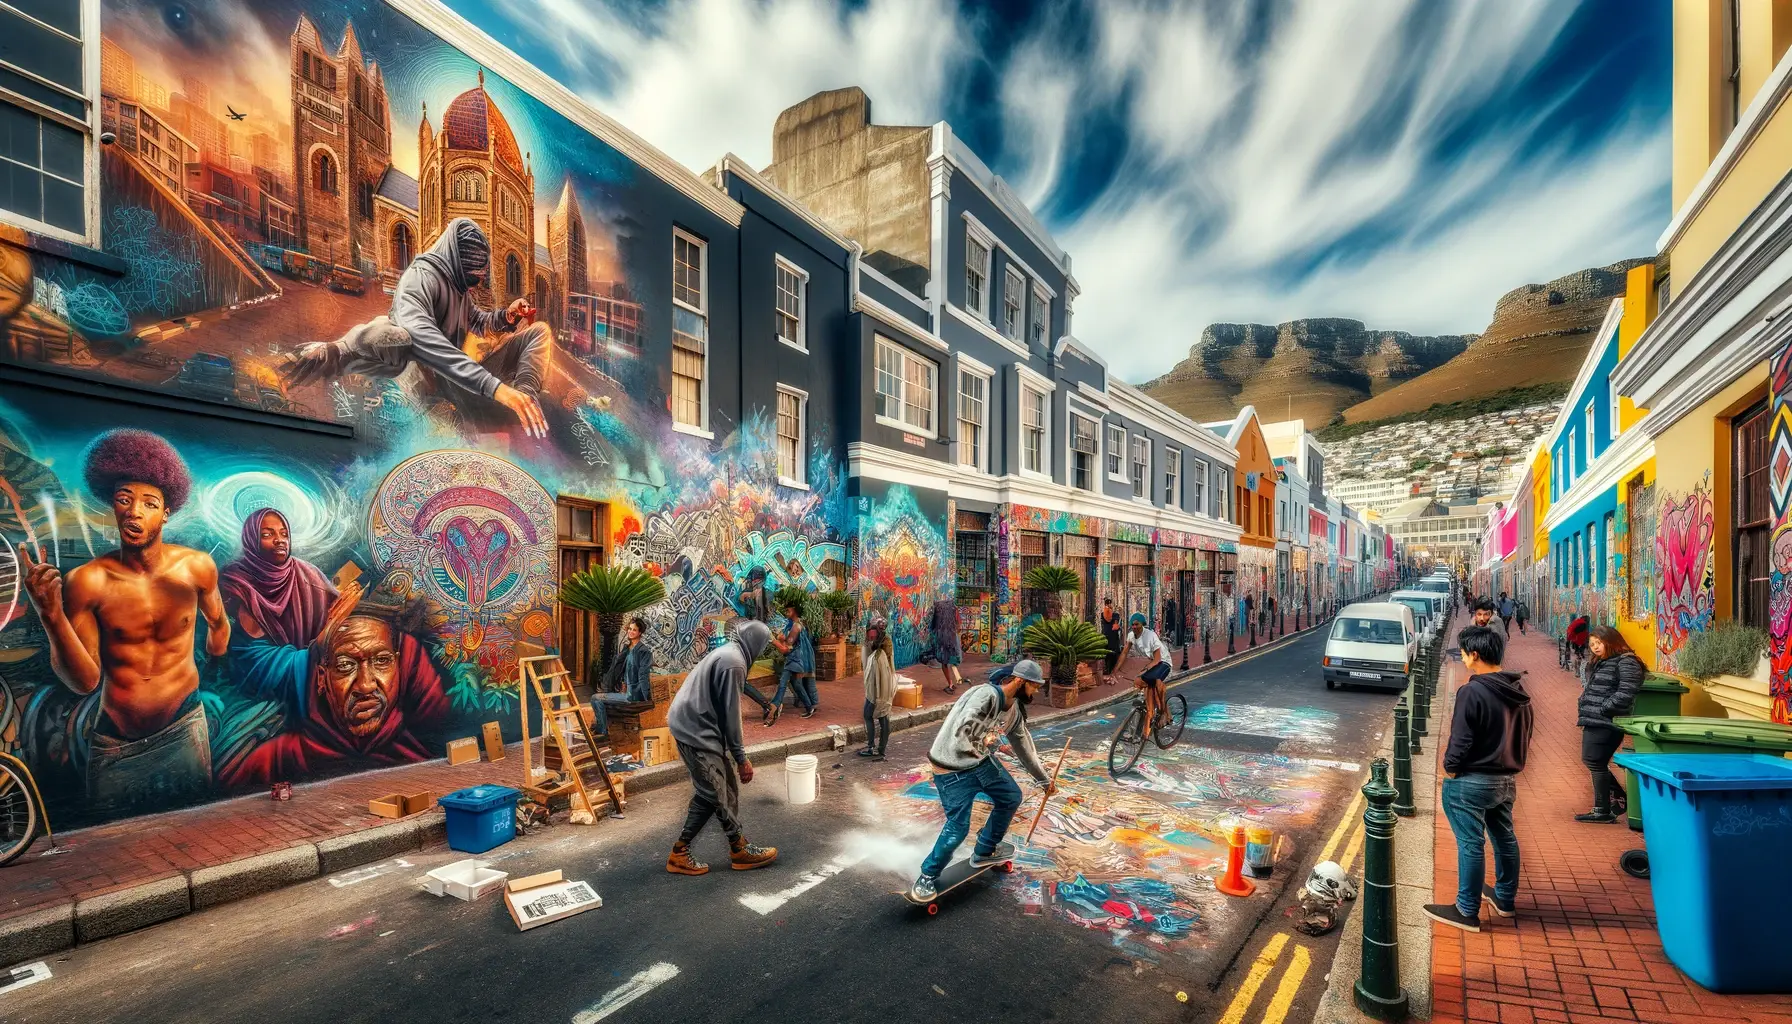 A dynamic and artistic image of Woodstock in Cape Town